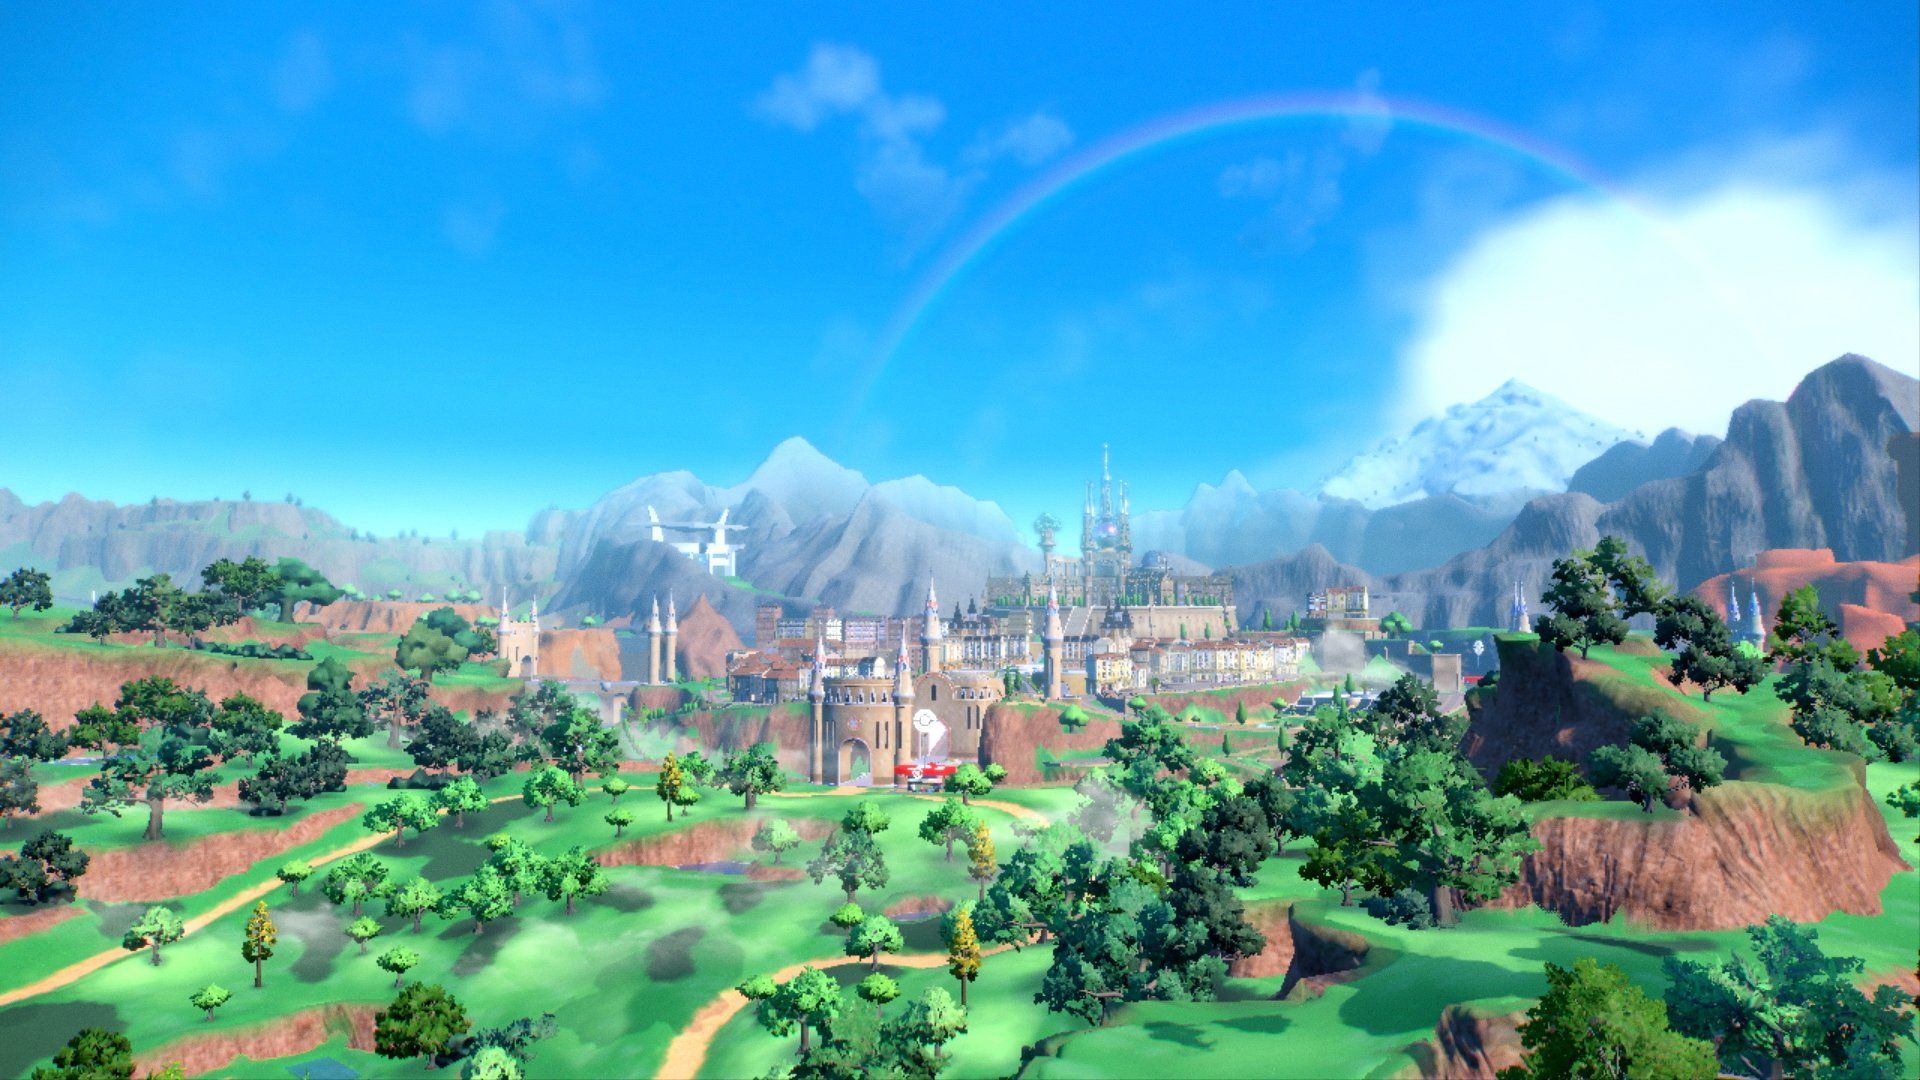 A screenshot of Pokemon Scarlet & Violet showing the overworld, a large city, and a large white building near mountains